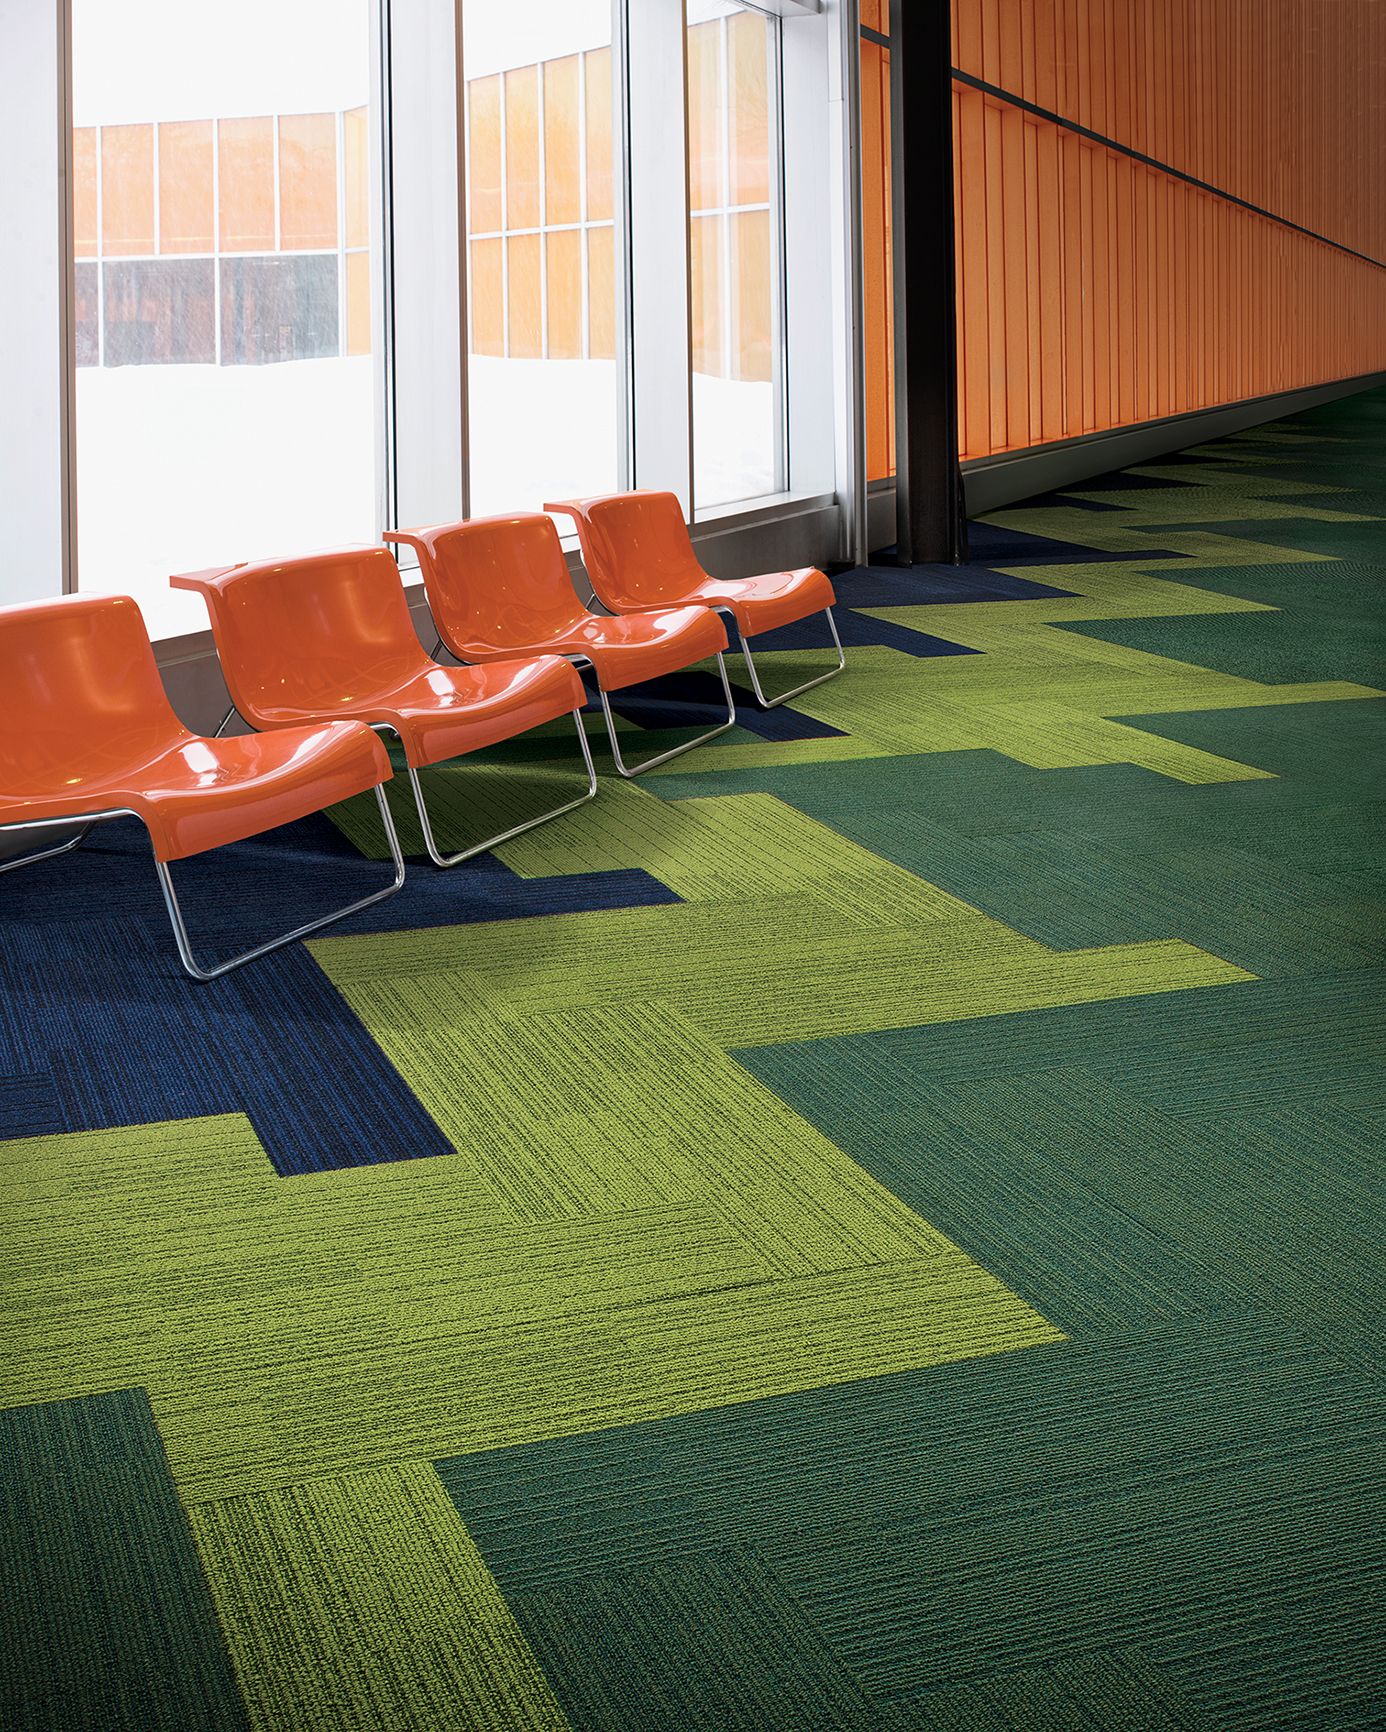 Interface On Line plank carpet tile in waiting area with orange hard plastic chairs against windows image number 8